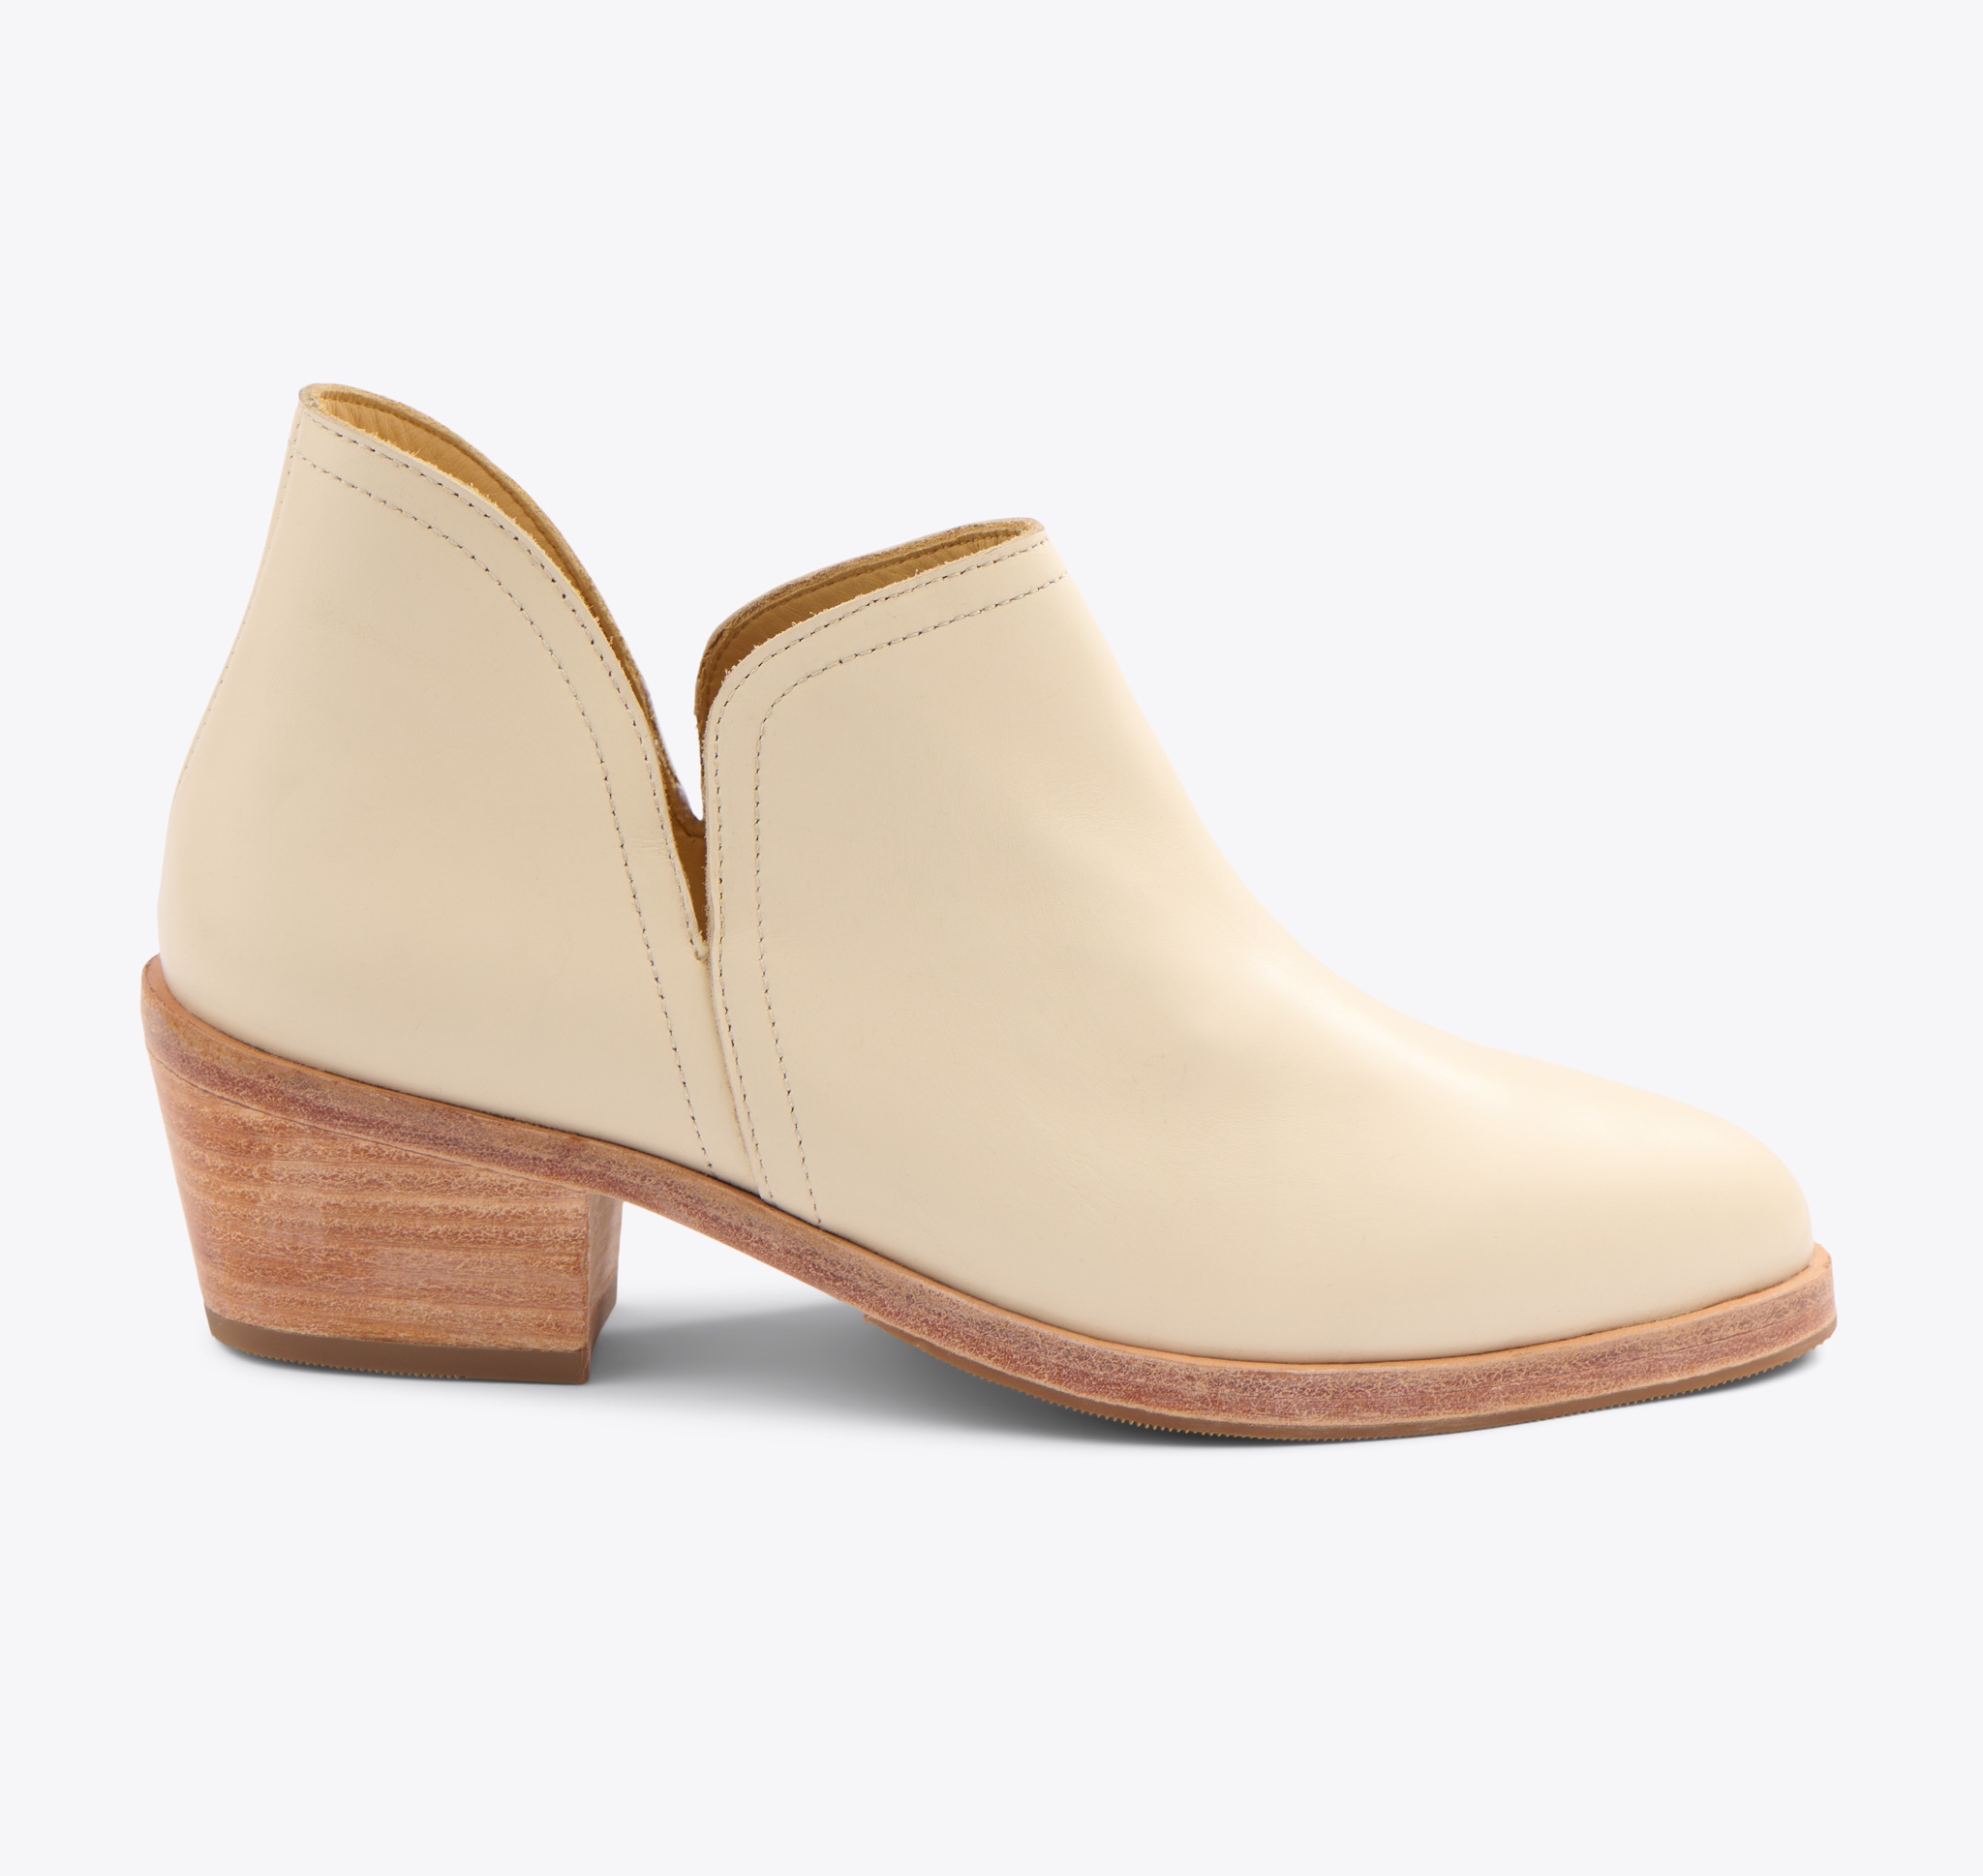 Nisolo Everyday Ankle Bootie Bone - Every Nisolo product is built on the foundation of comfort, function, and design. 